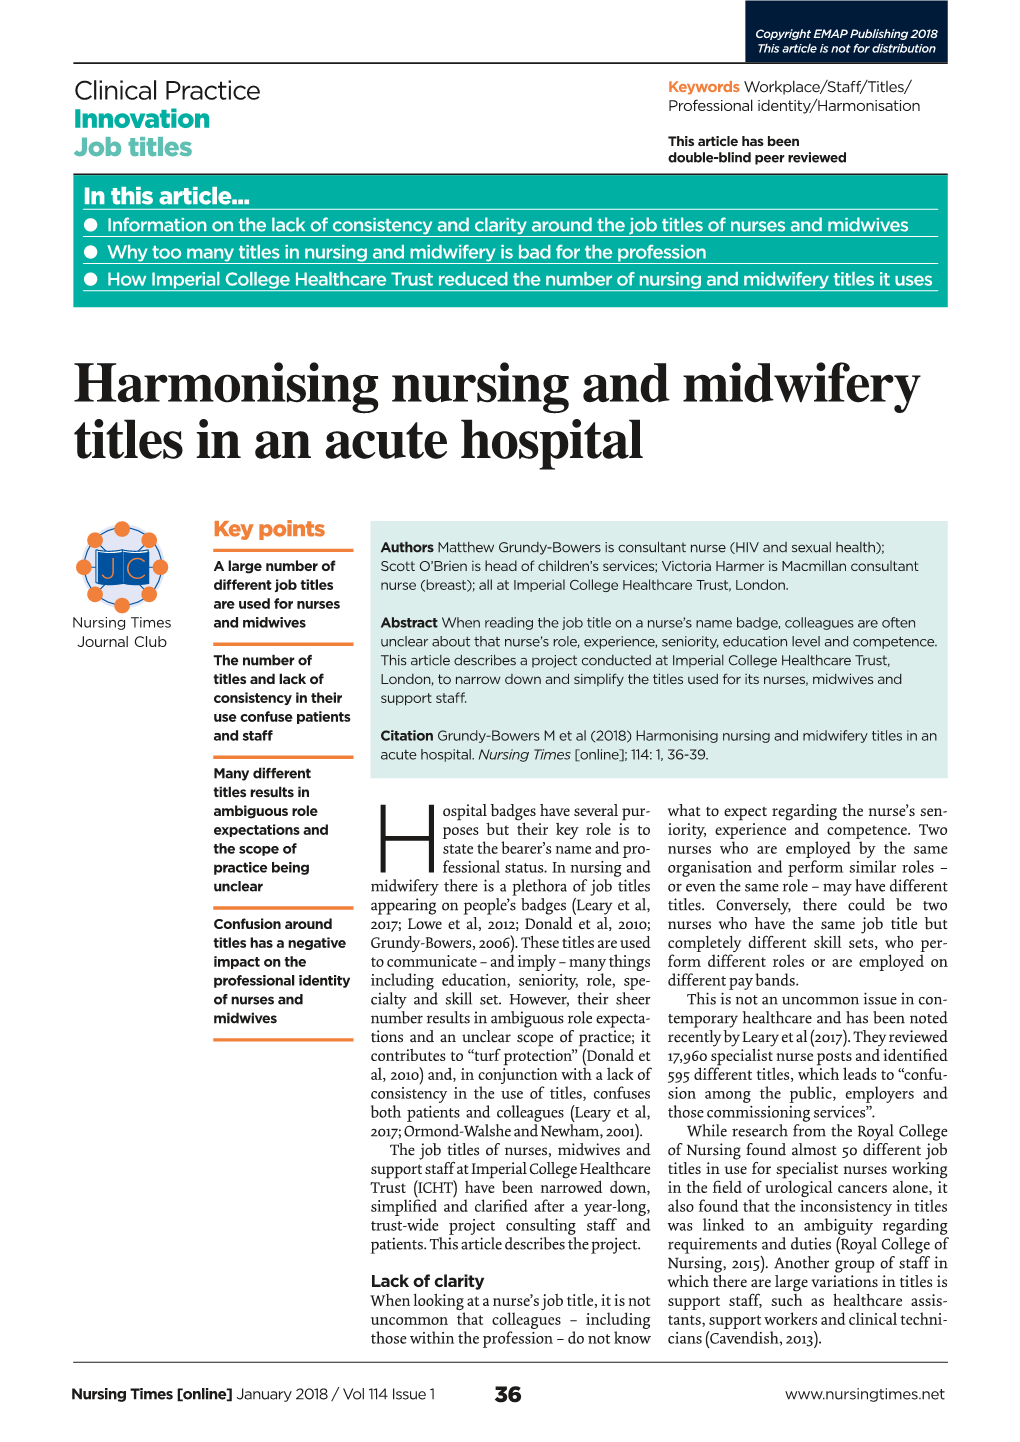 Harmonising Nursing and Midwifery Titles in an Acute Hospital